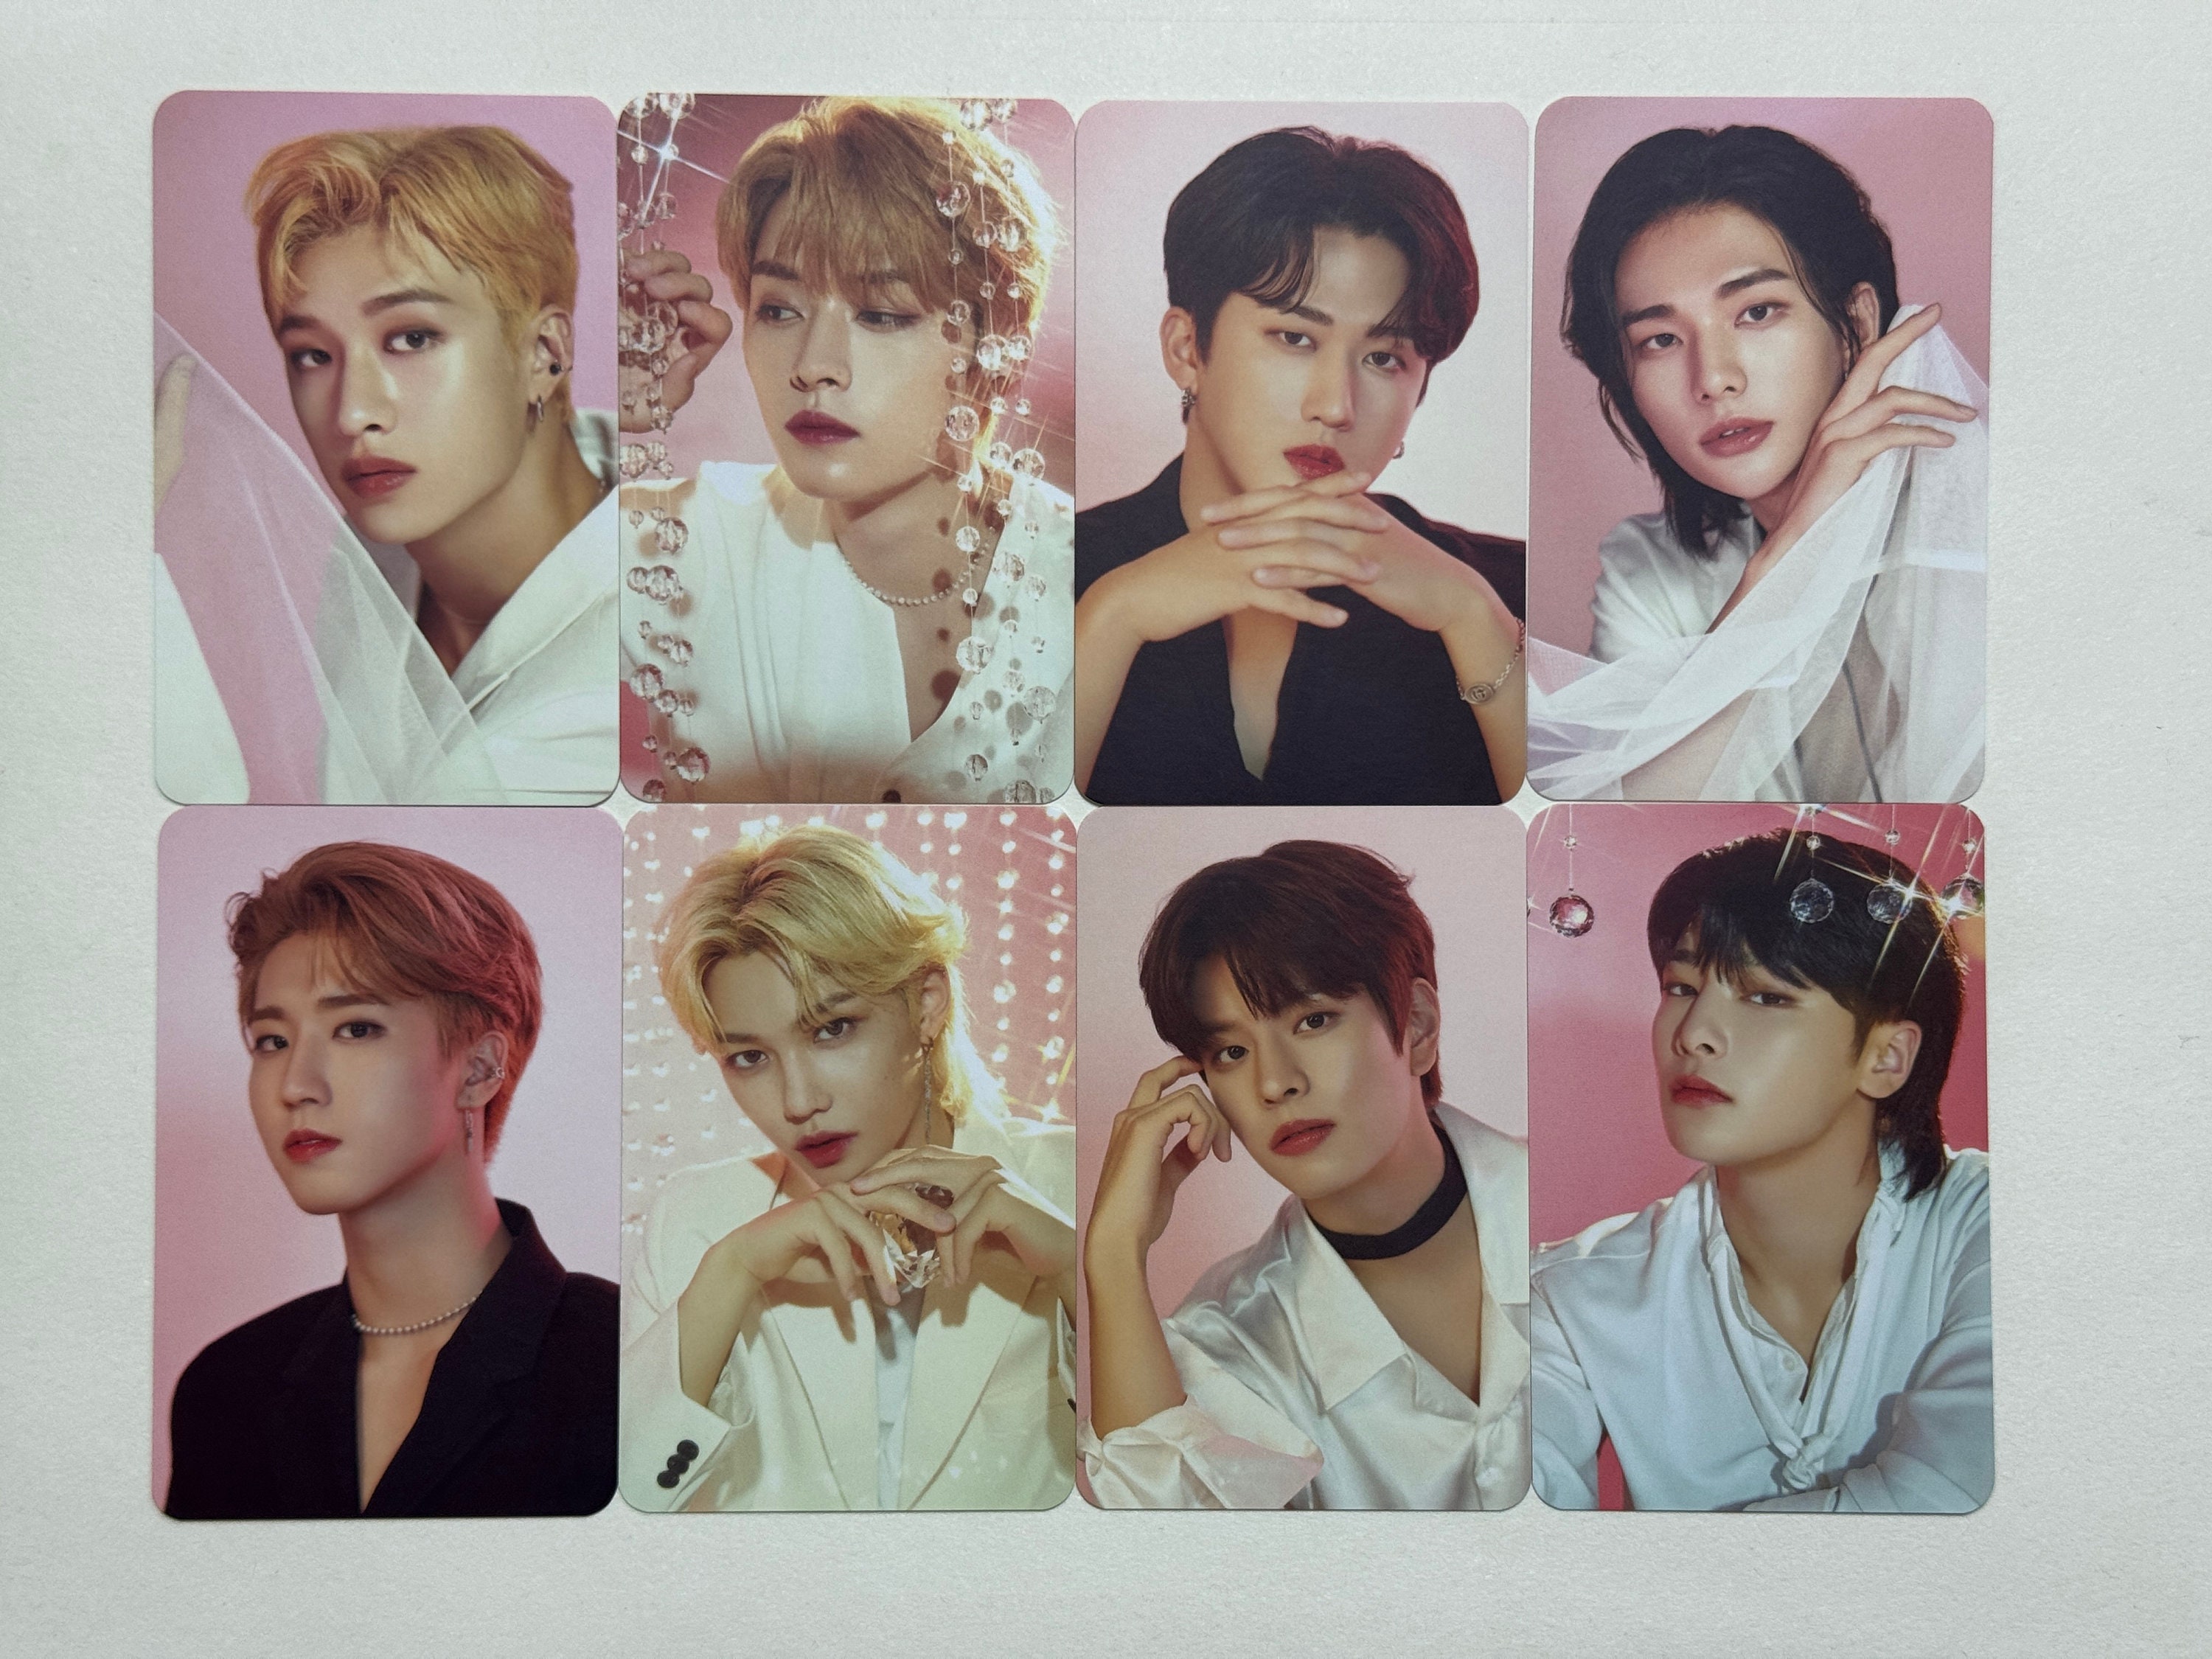 STRAY KIDS OFFICIAL PHOTO CARD - [Christmas evel ] – K Pop Pink Store  [Website]